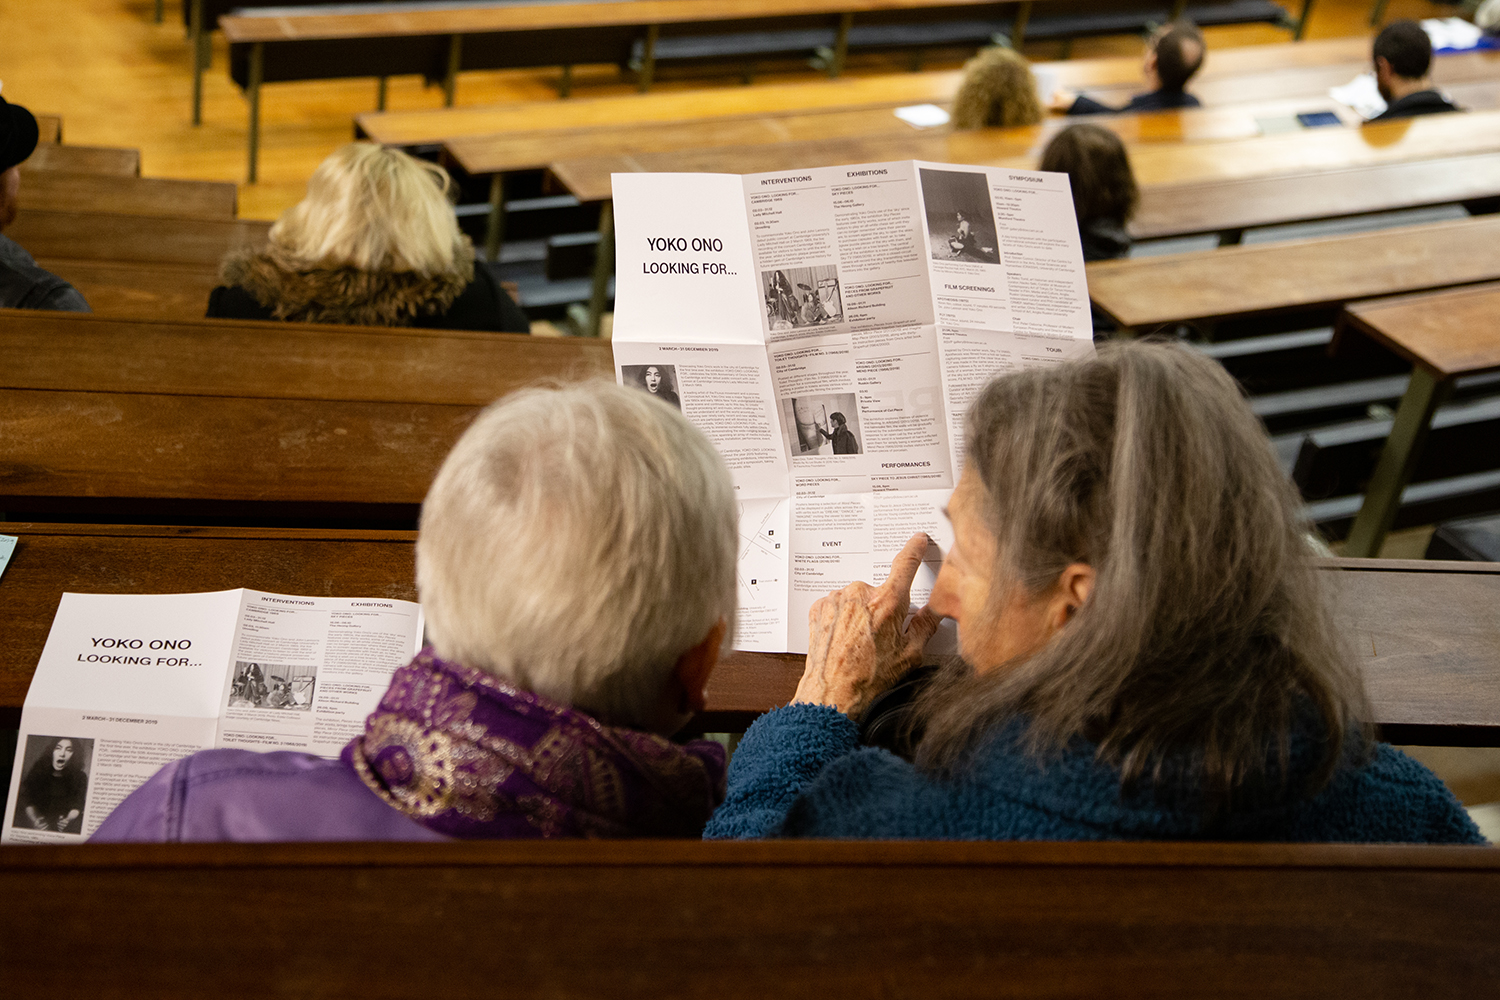 Audience members studying the exhibitions programme